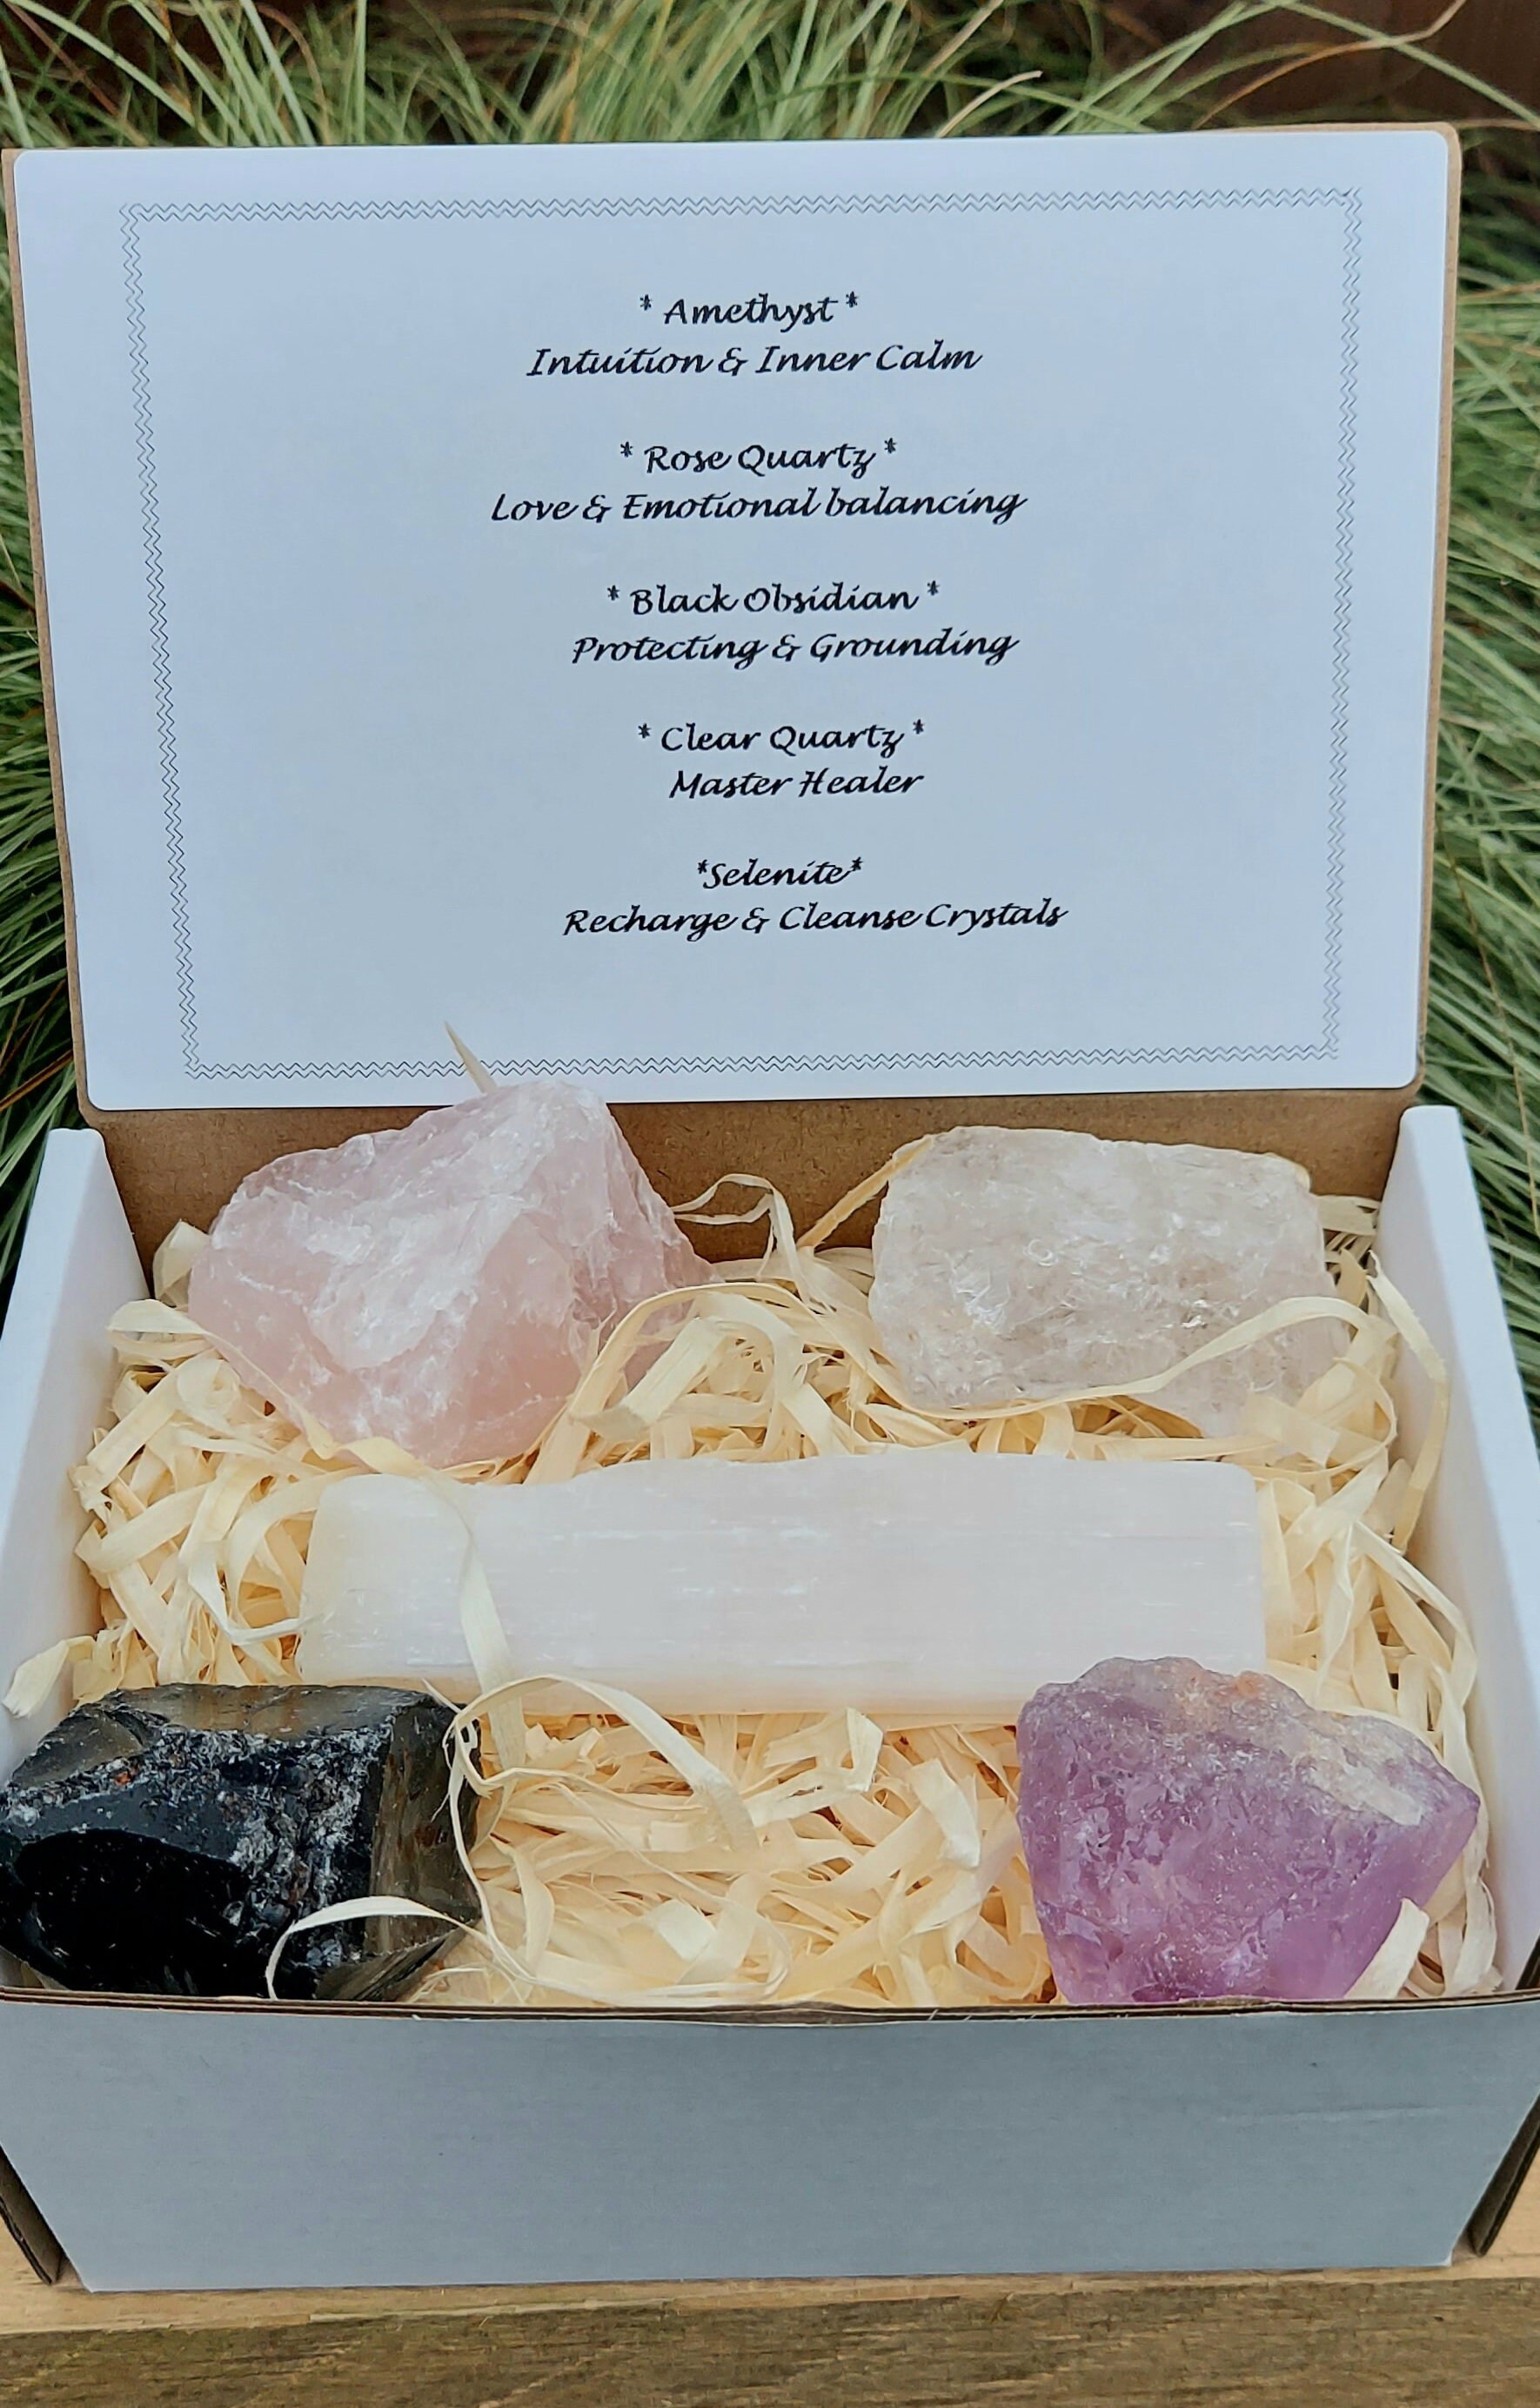 Soy Candle Kit With CRYSTALS, DIY Candle Making Kit for Beginners, Craft Kit  for Adults, Christmas Gift, New Year Gift Ideas, Xmas Present 